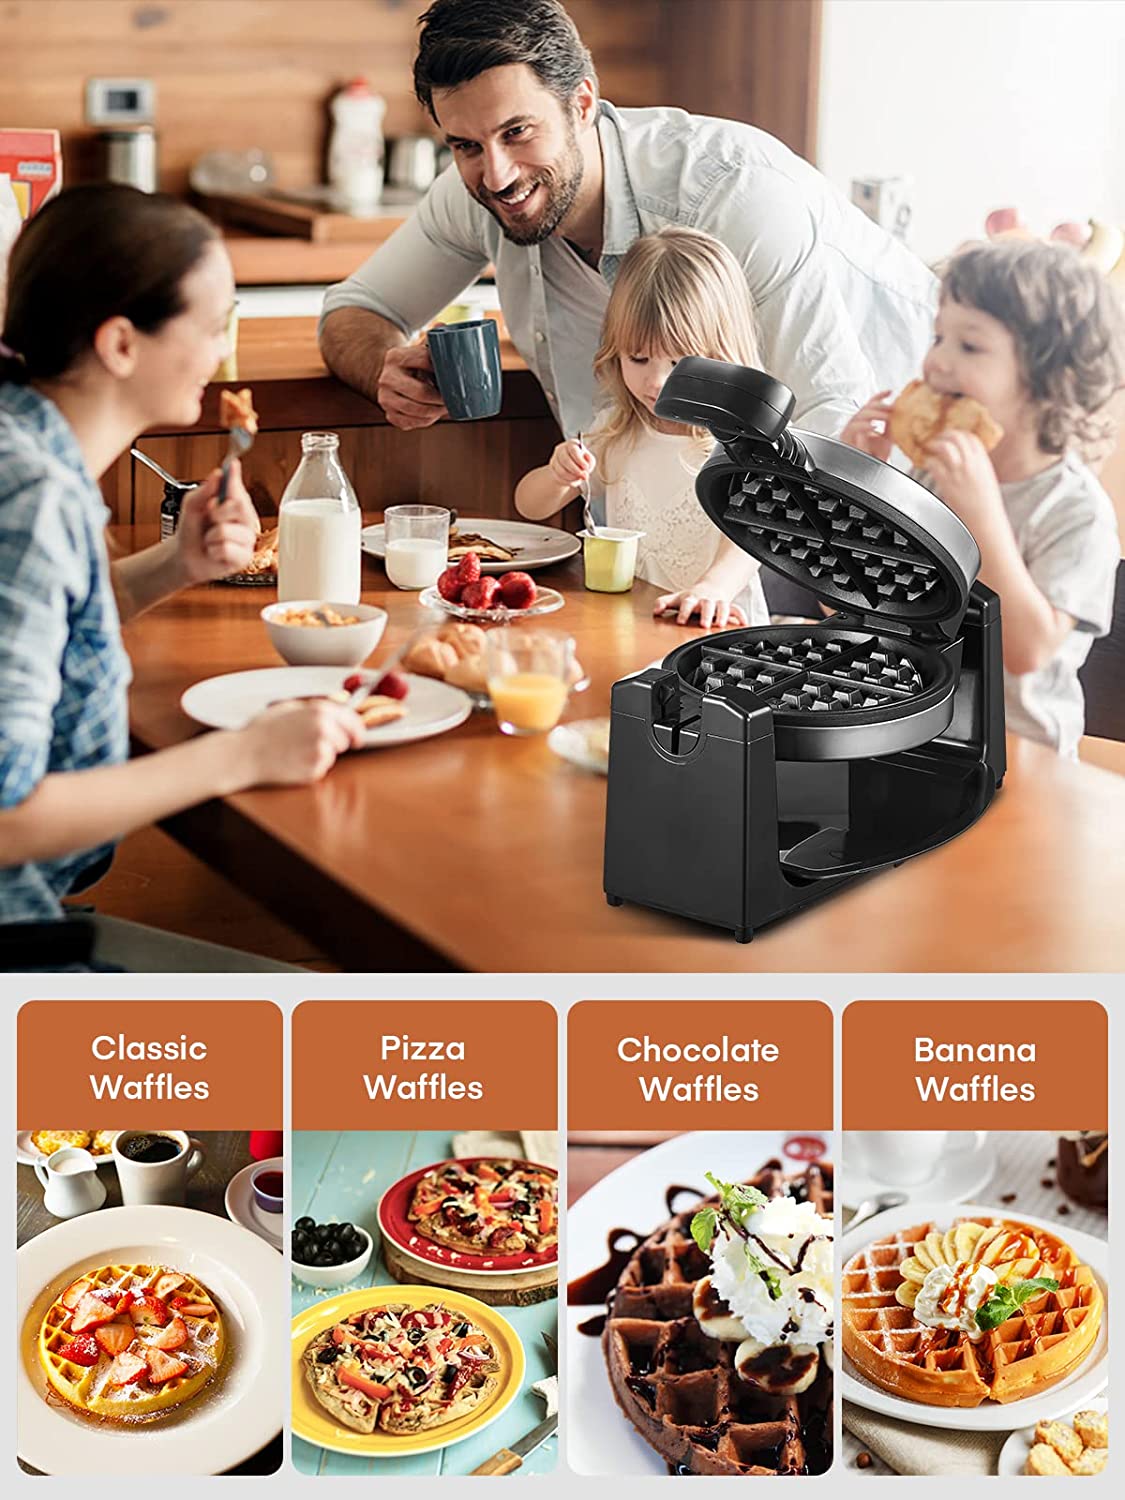 make your fav. waffles, Flip Belgian Waffle Maker, 180° Rotating Waffle Iron with Easy to Clean Non-Stick Surfaces, Classic 1" Thick Waffles, Included Recipe, Removable Drip Tray, Browning Control, 1100W, Stainless Steel